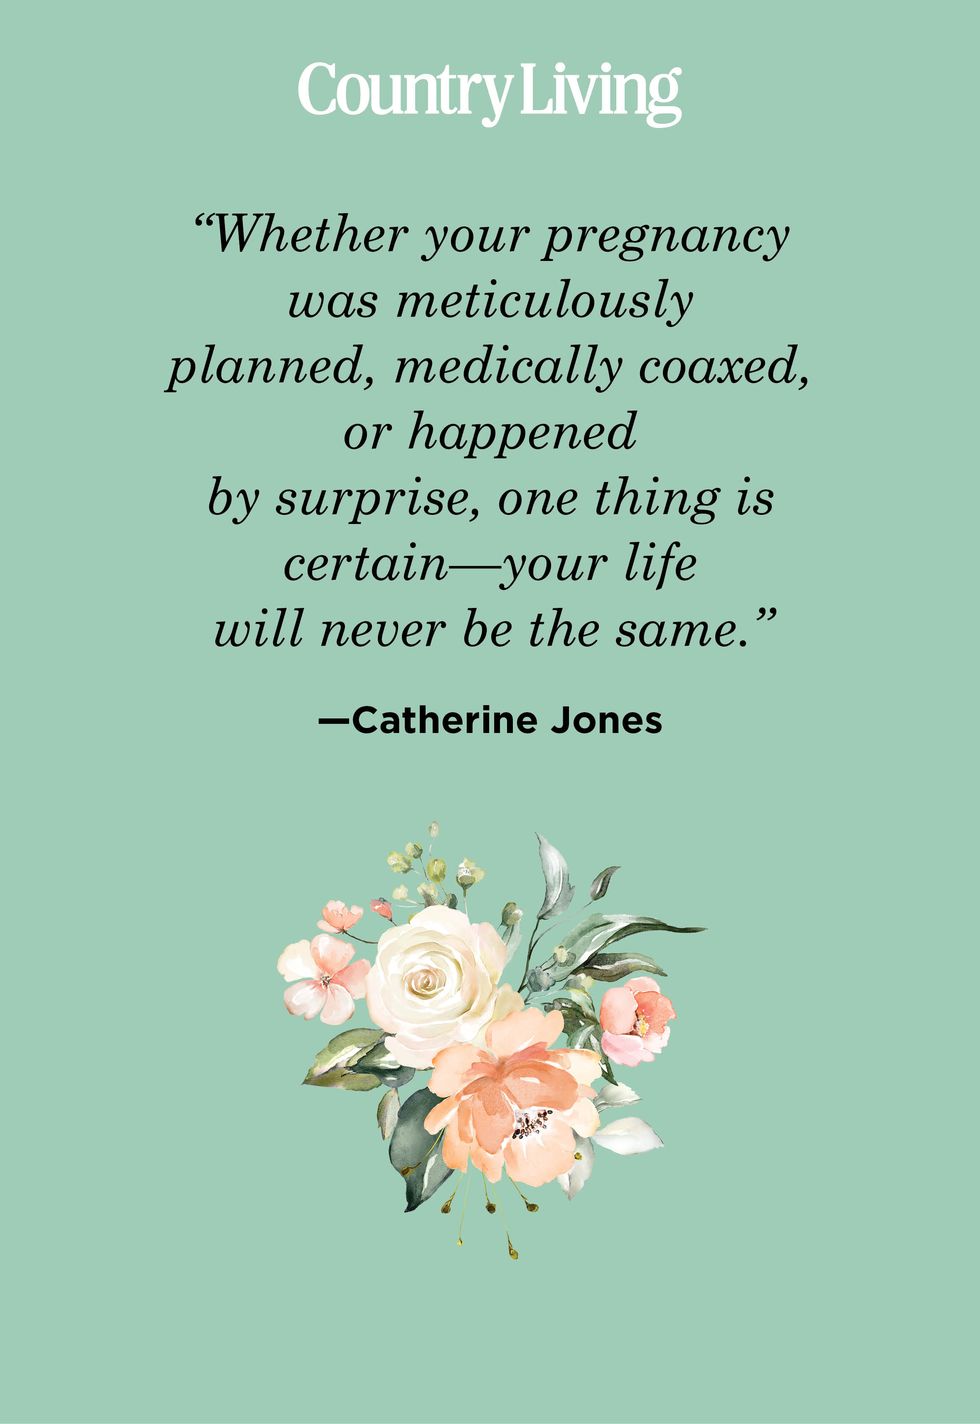 quotes about motherhood